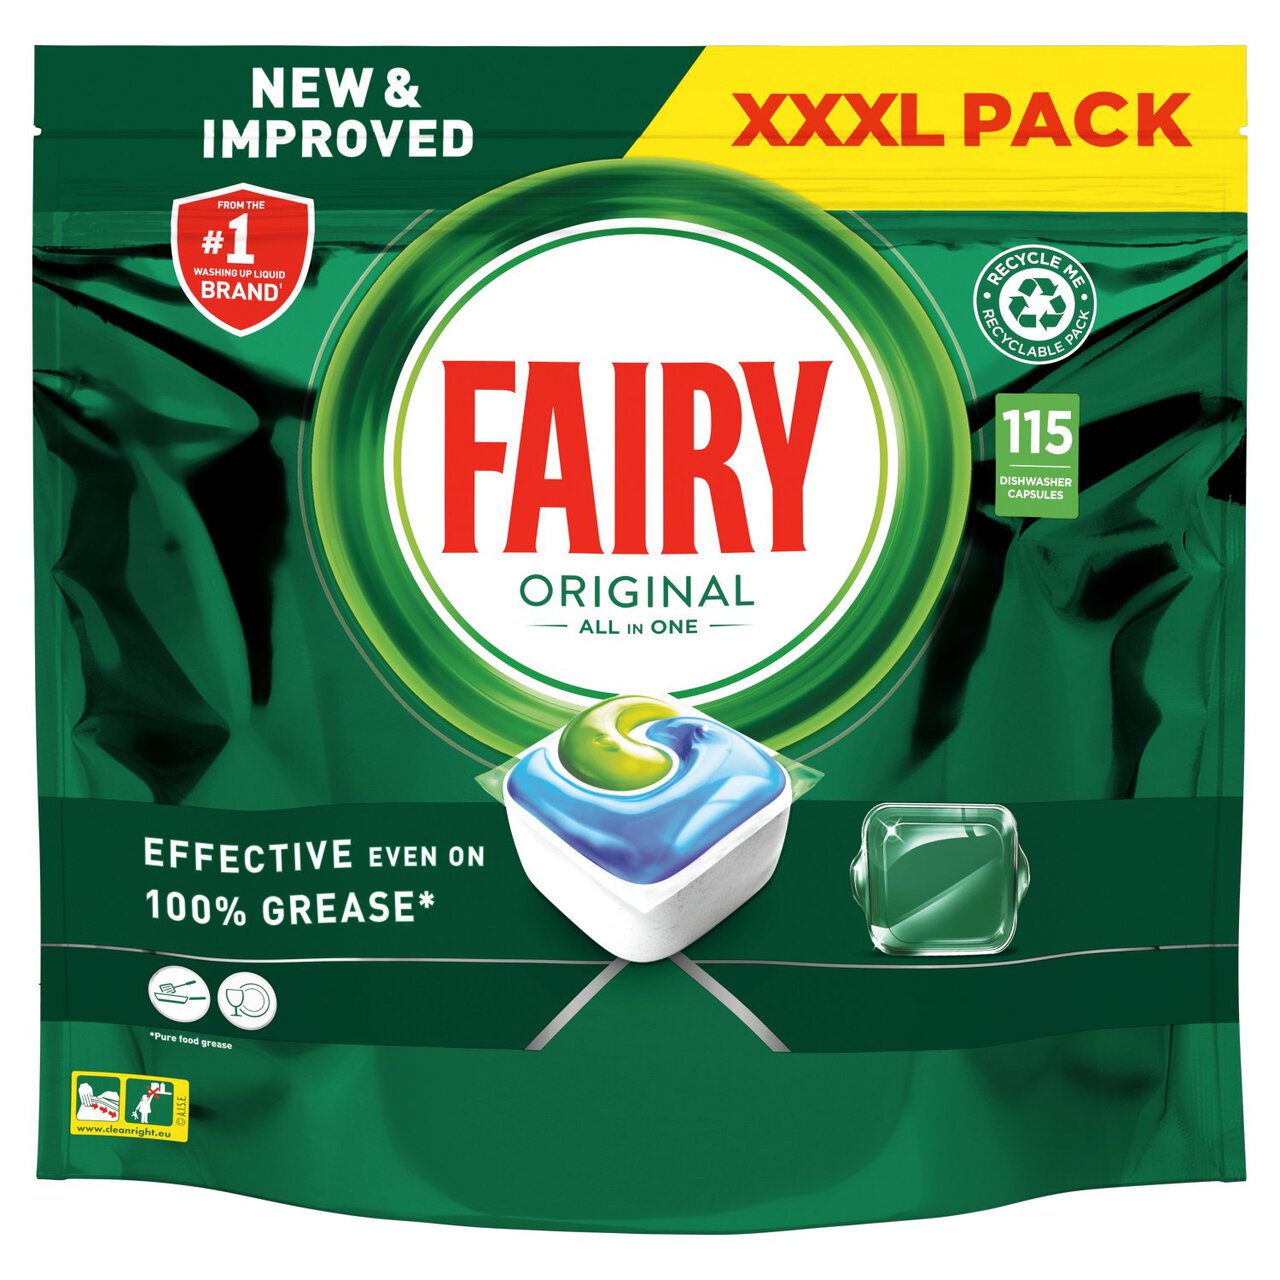 Fairy Original All In One Dishwasher Tablets 115 per pack